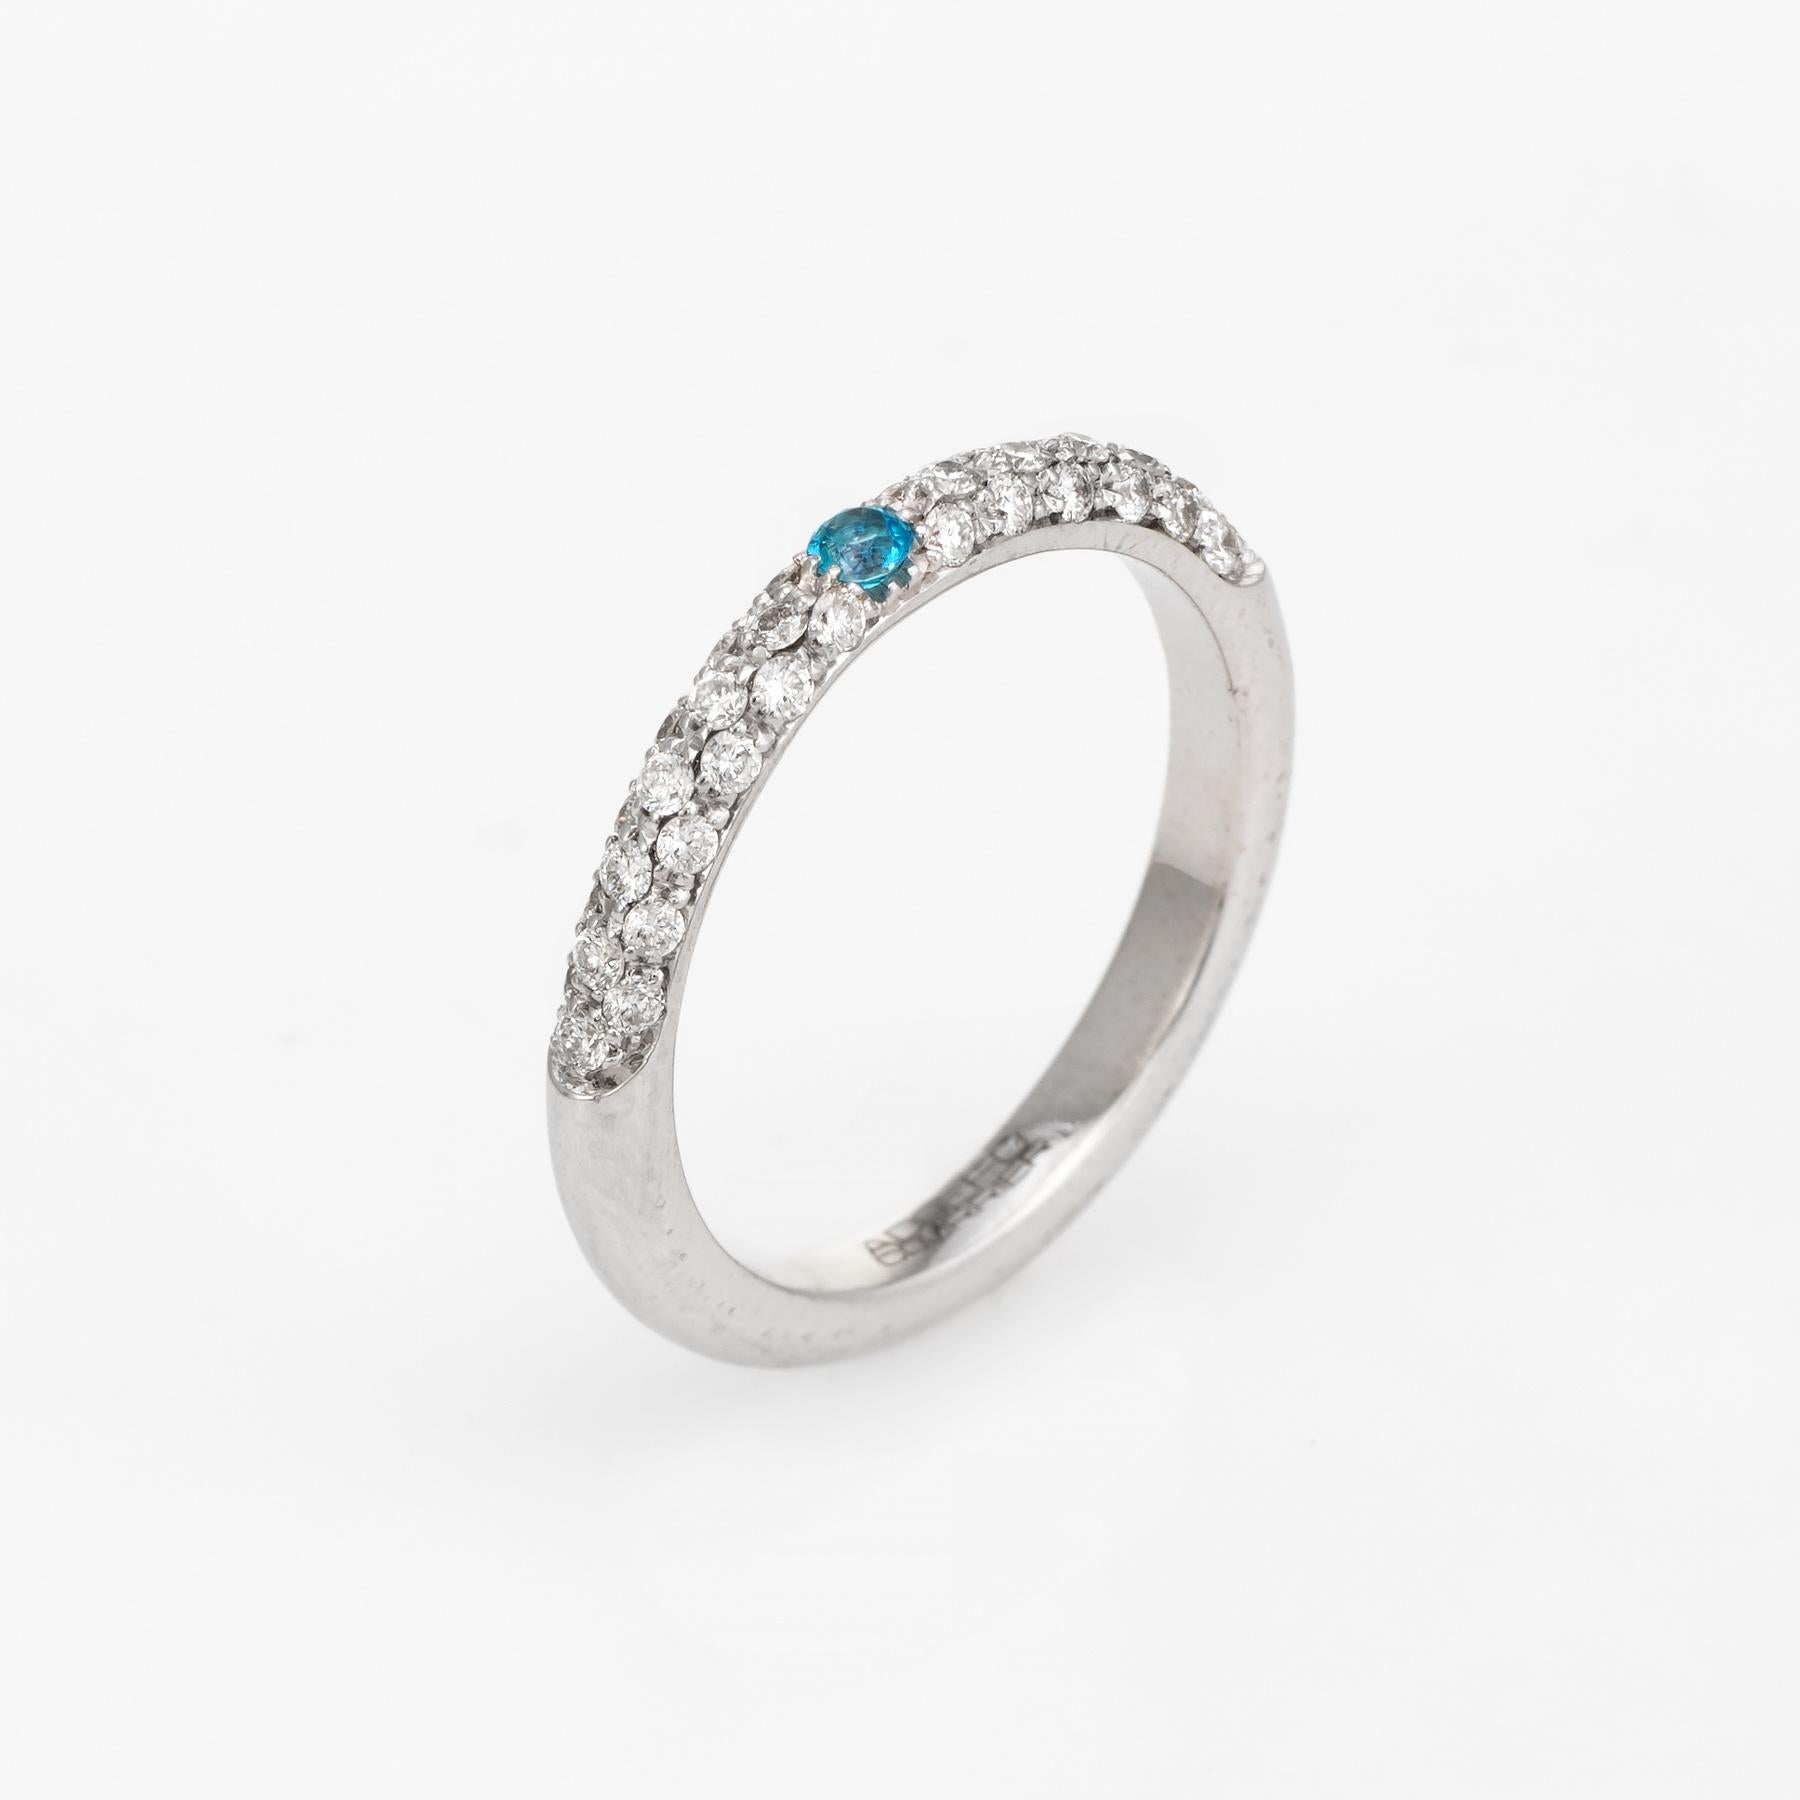 Elegant Adolfo Courrier stacking ring, crafted in 18 karat white gold. 

One estimated 0.05 carat turquoise, accented with 36 estimated 0.01 carat round brilliant cut diamonds totaling an estimated 0.36 carats (estimated at G-H color and VS2